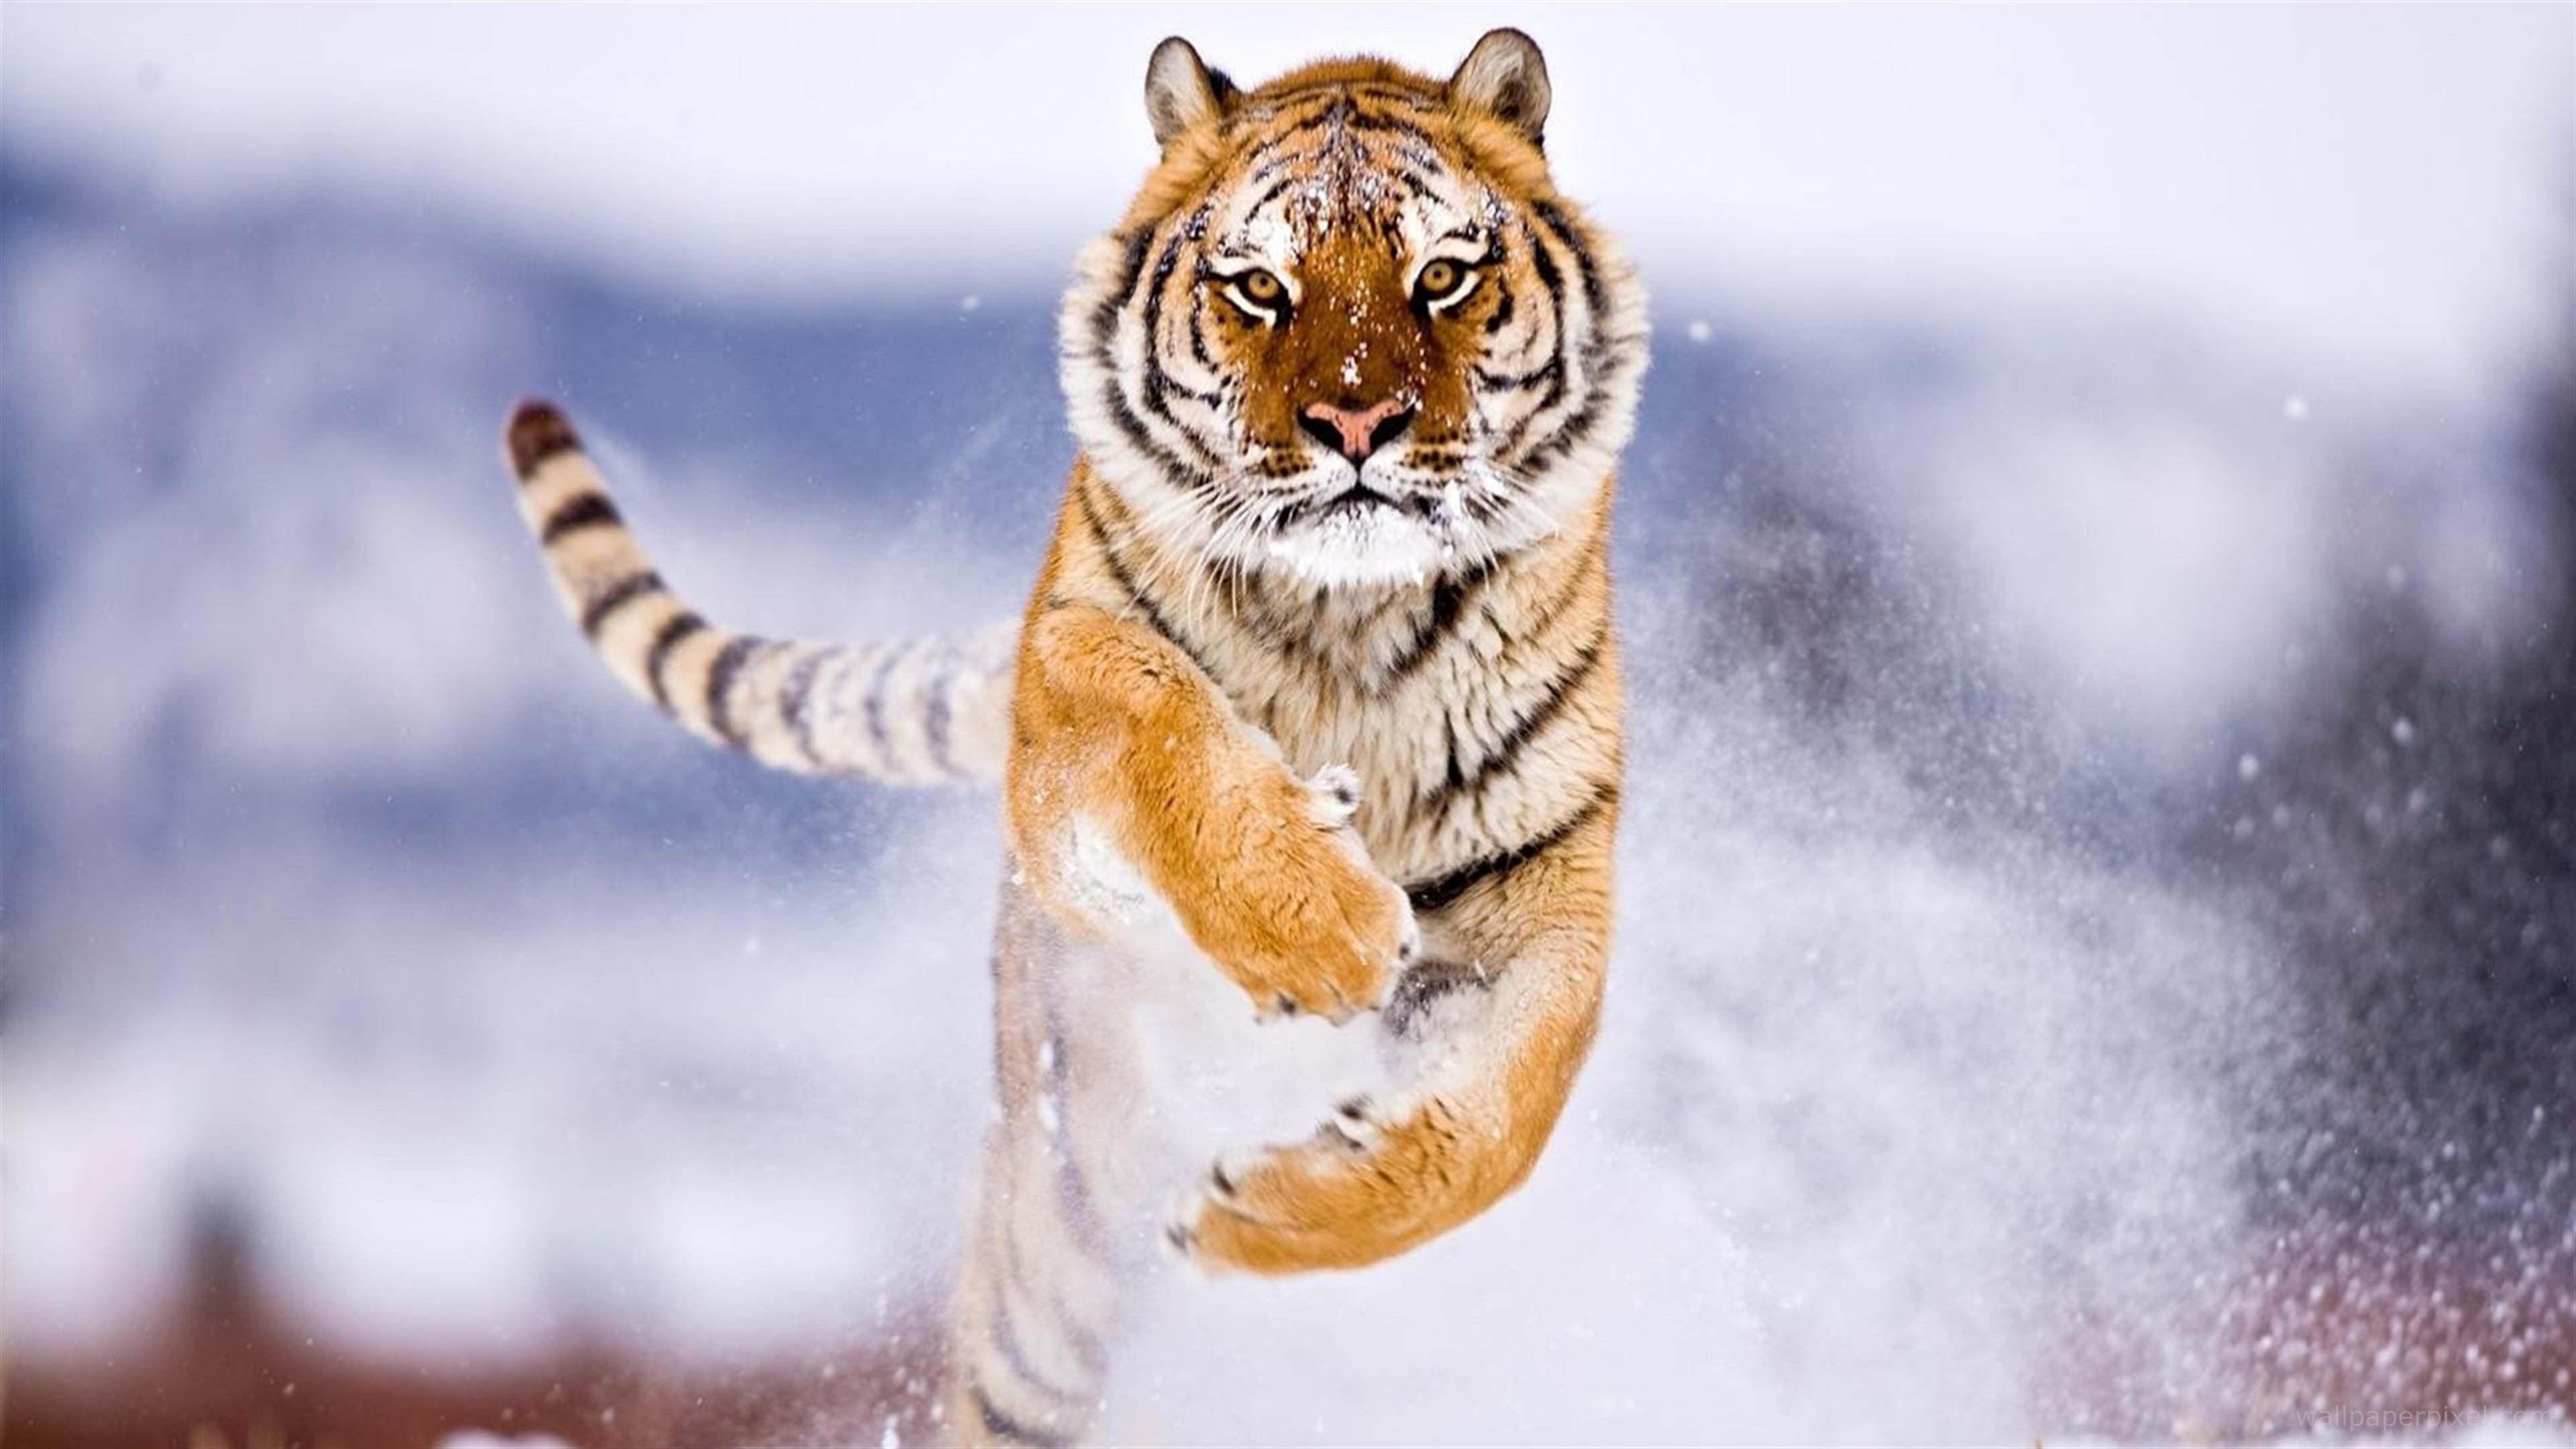 Awesome Tiger High Qualities Image Quality Desktop Pict